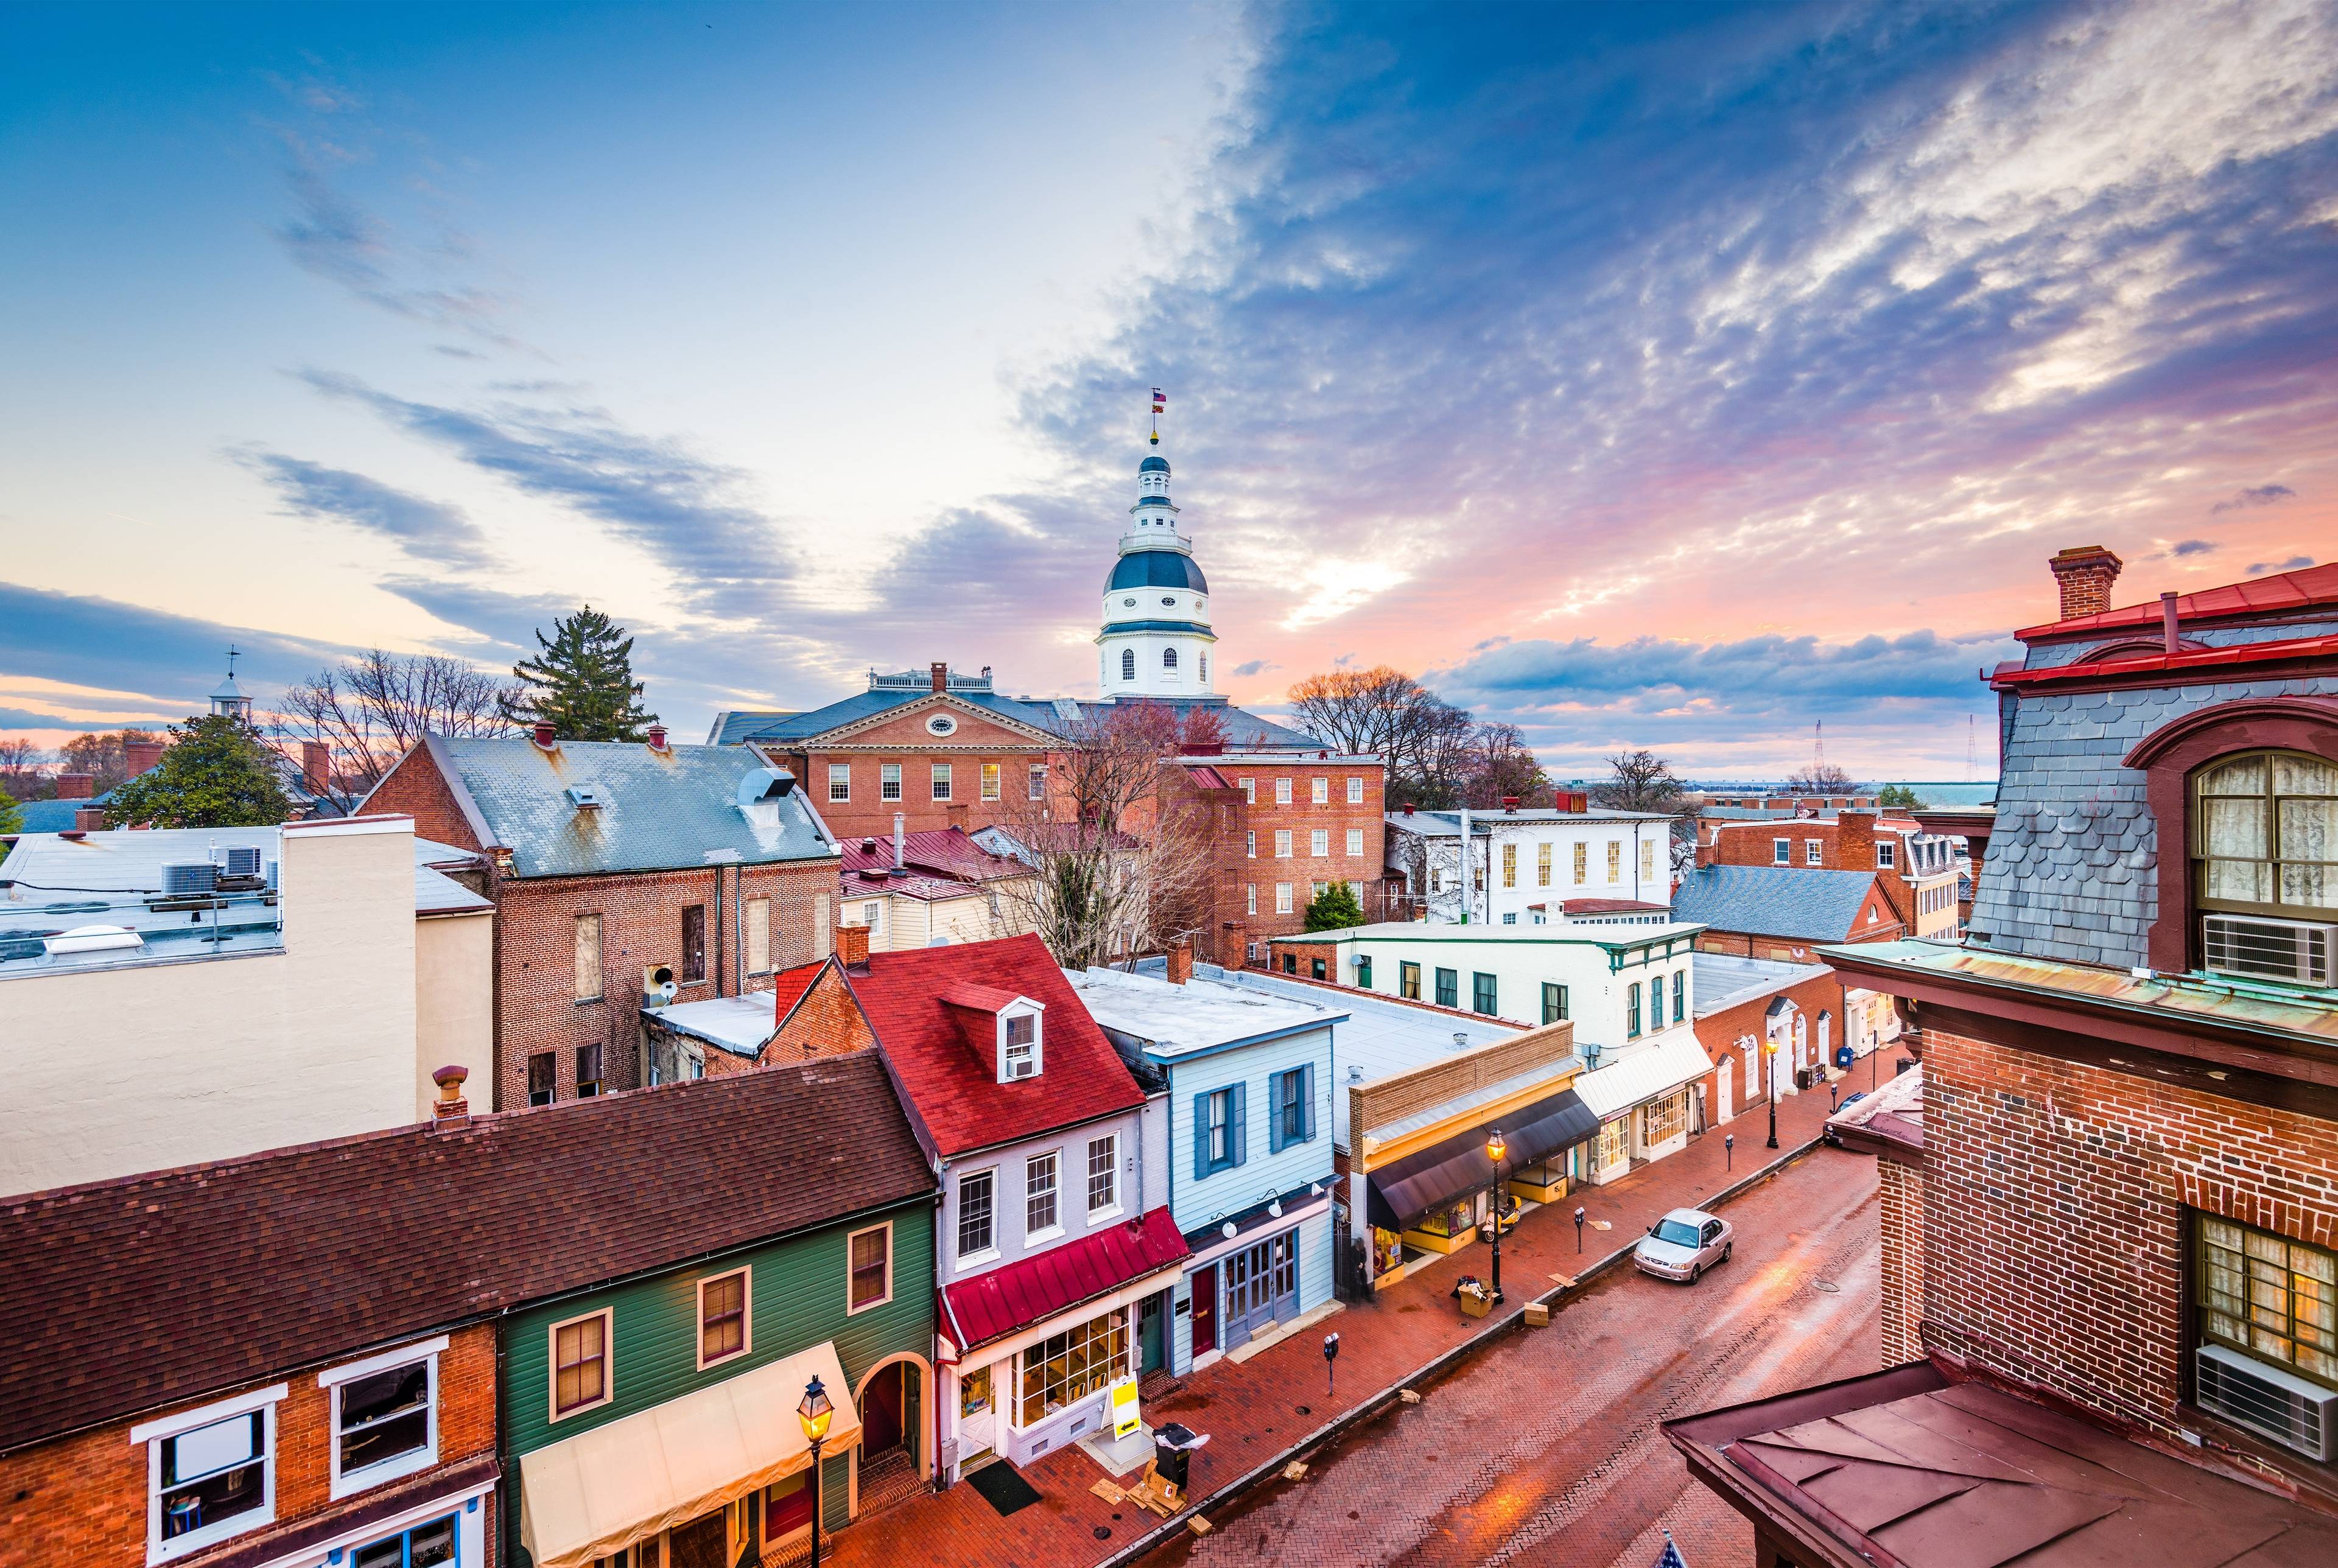 Road Trip to Annapolis: Maryland History, Seafood, and the Chesapeake Bay